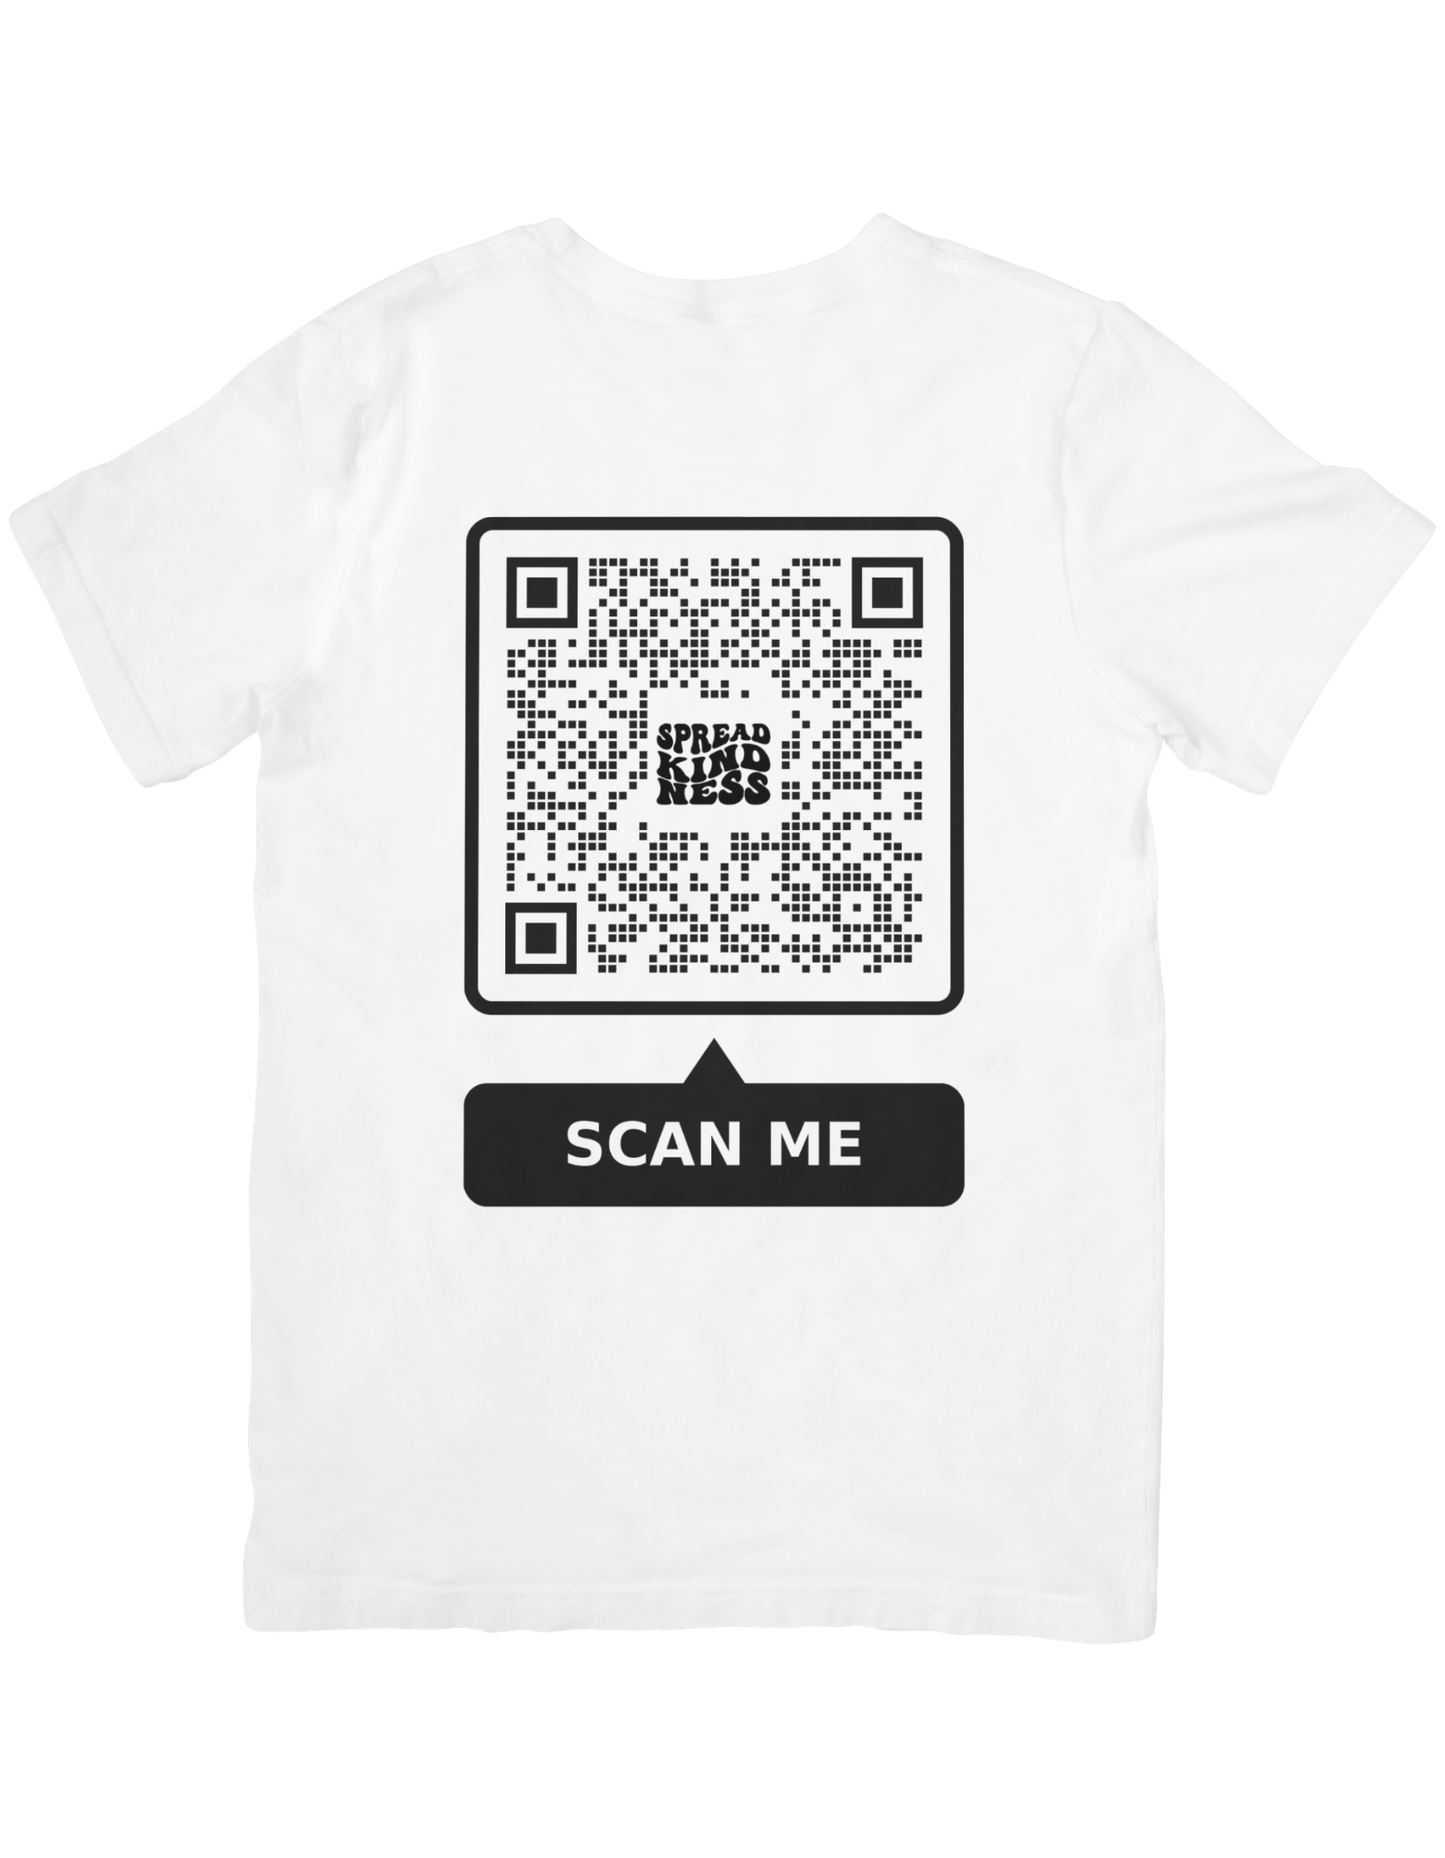 QR code T-Shirt “There is a future version of you that is proud you didn’t give up.”